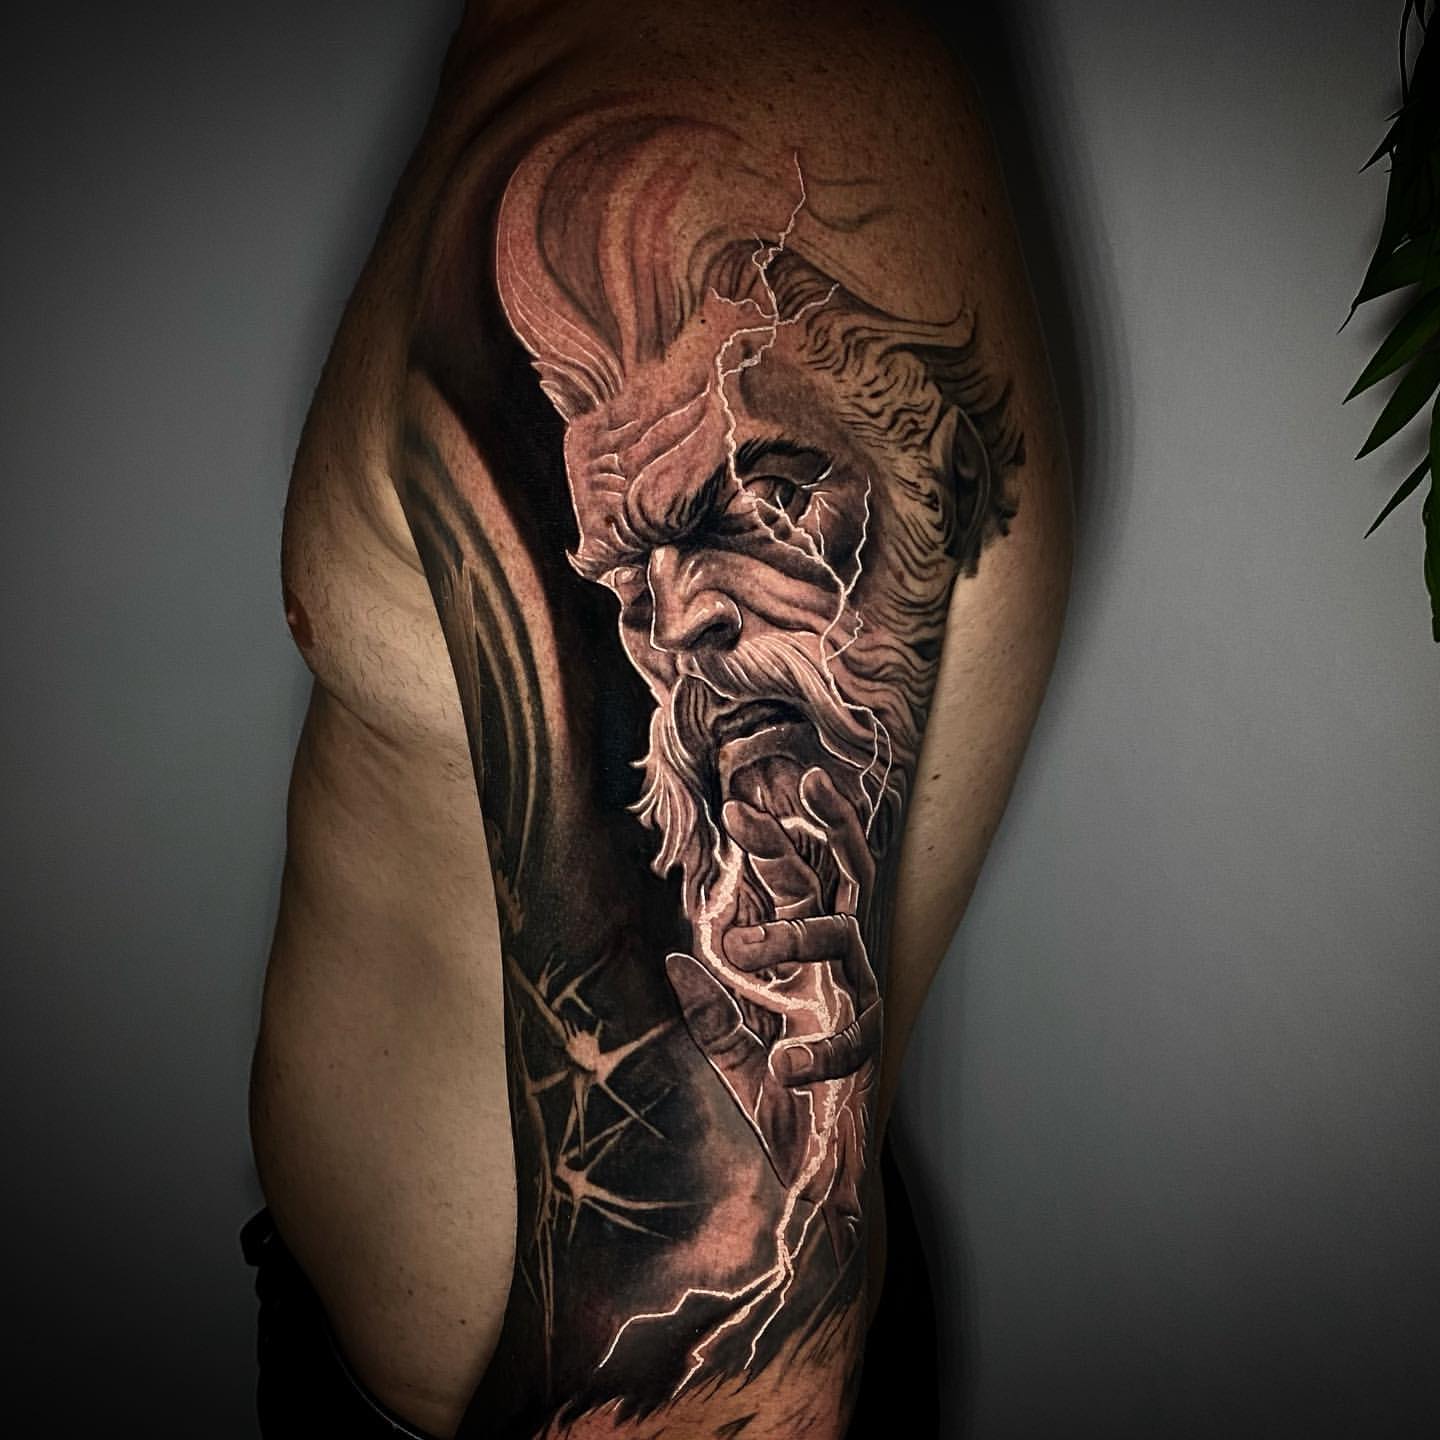 God Zeus x Spartan | Ancient Greek Themed Forearm Sleeve Done by Jimmy Toge  | By Two Guns Tattoo BaliFacebook